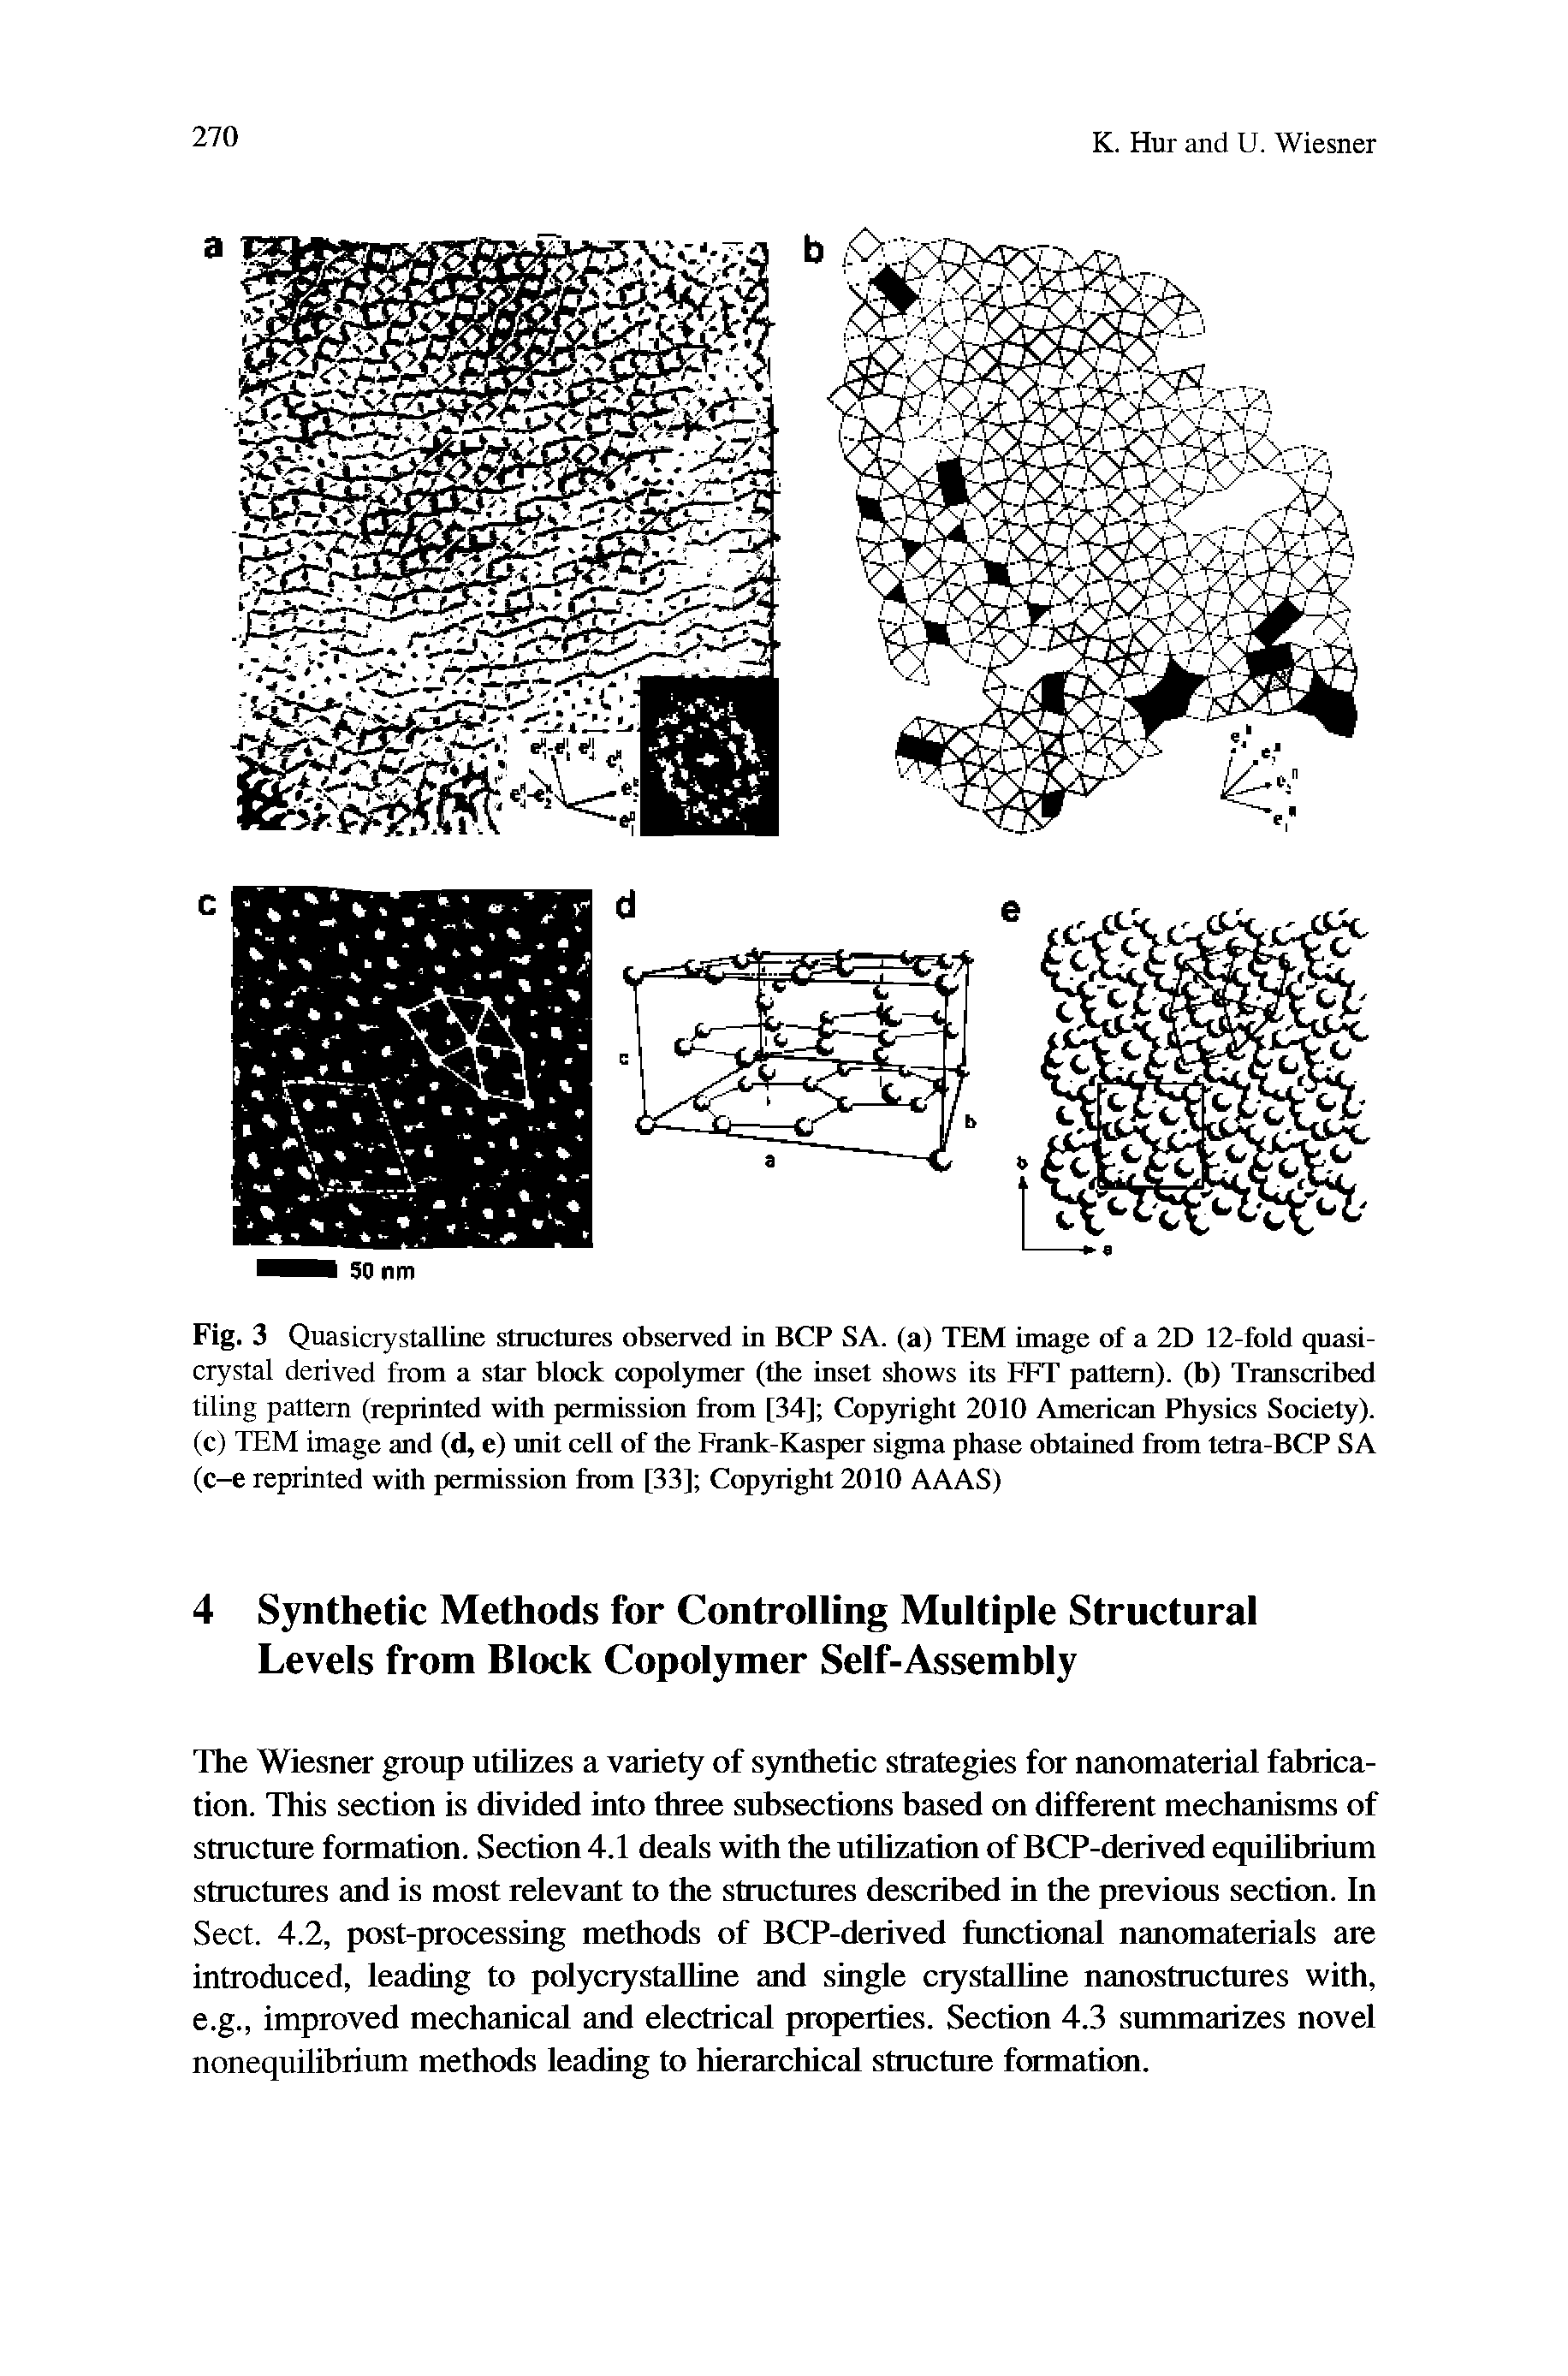 Fig. 3 Quasicrystalline structures observed in BCP SA. (a) TEM image of a 2D 12-fold quasicrystal derived from a star block copolymer (the inset shows its EFT pattern), (b) Transcribed tiling pattern (reprinted with permission from [34] Copyright 2010 American Physics Society), (c) TEM image and (d, e) unit cell of the Frank-Kasper sigma phase obtained from tetra-BCP SA (c-e reprinted with permission from [33] Copyright 2010 AAAS)...